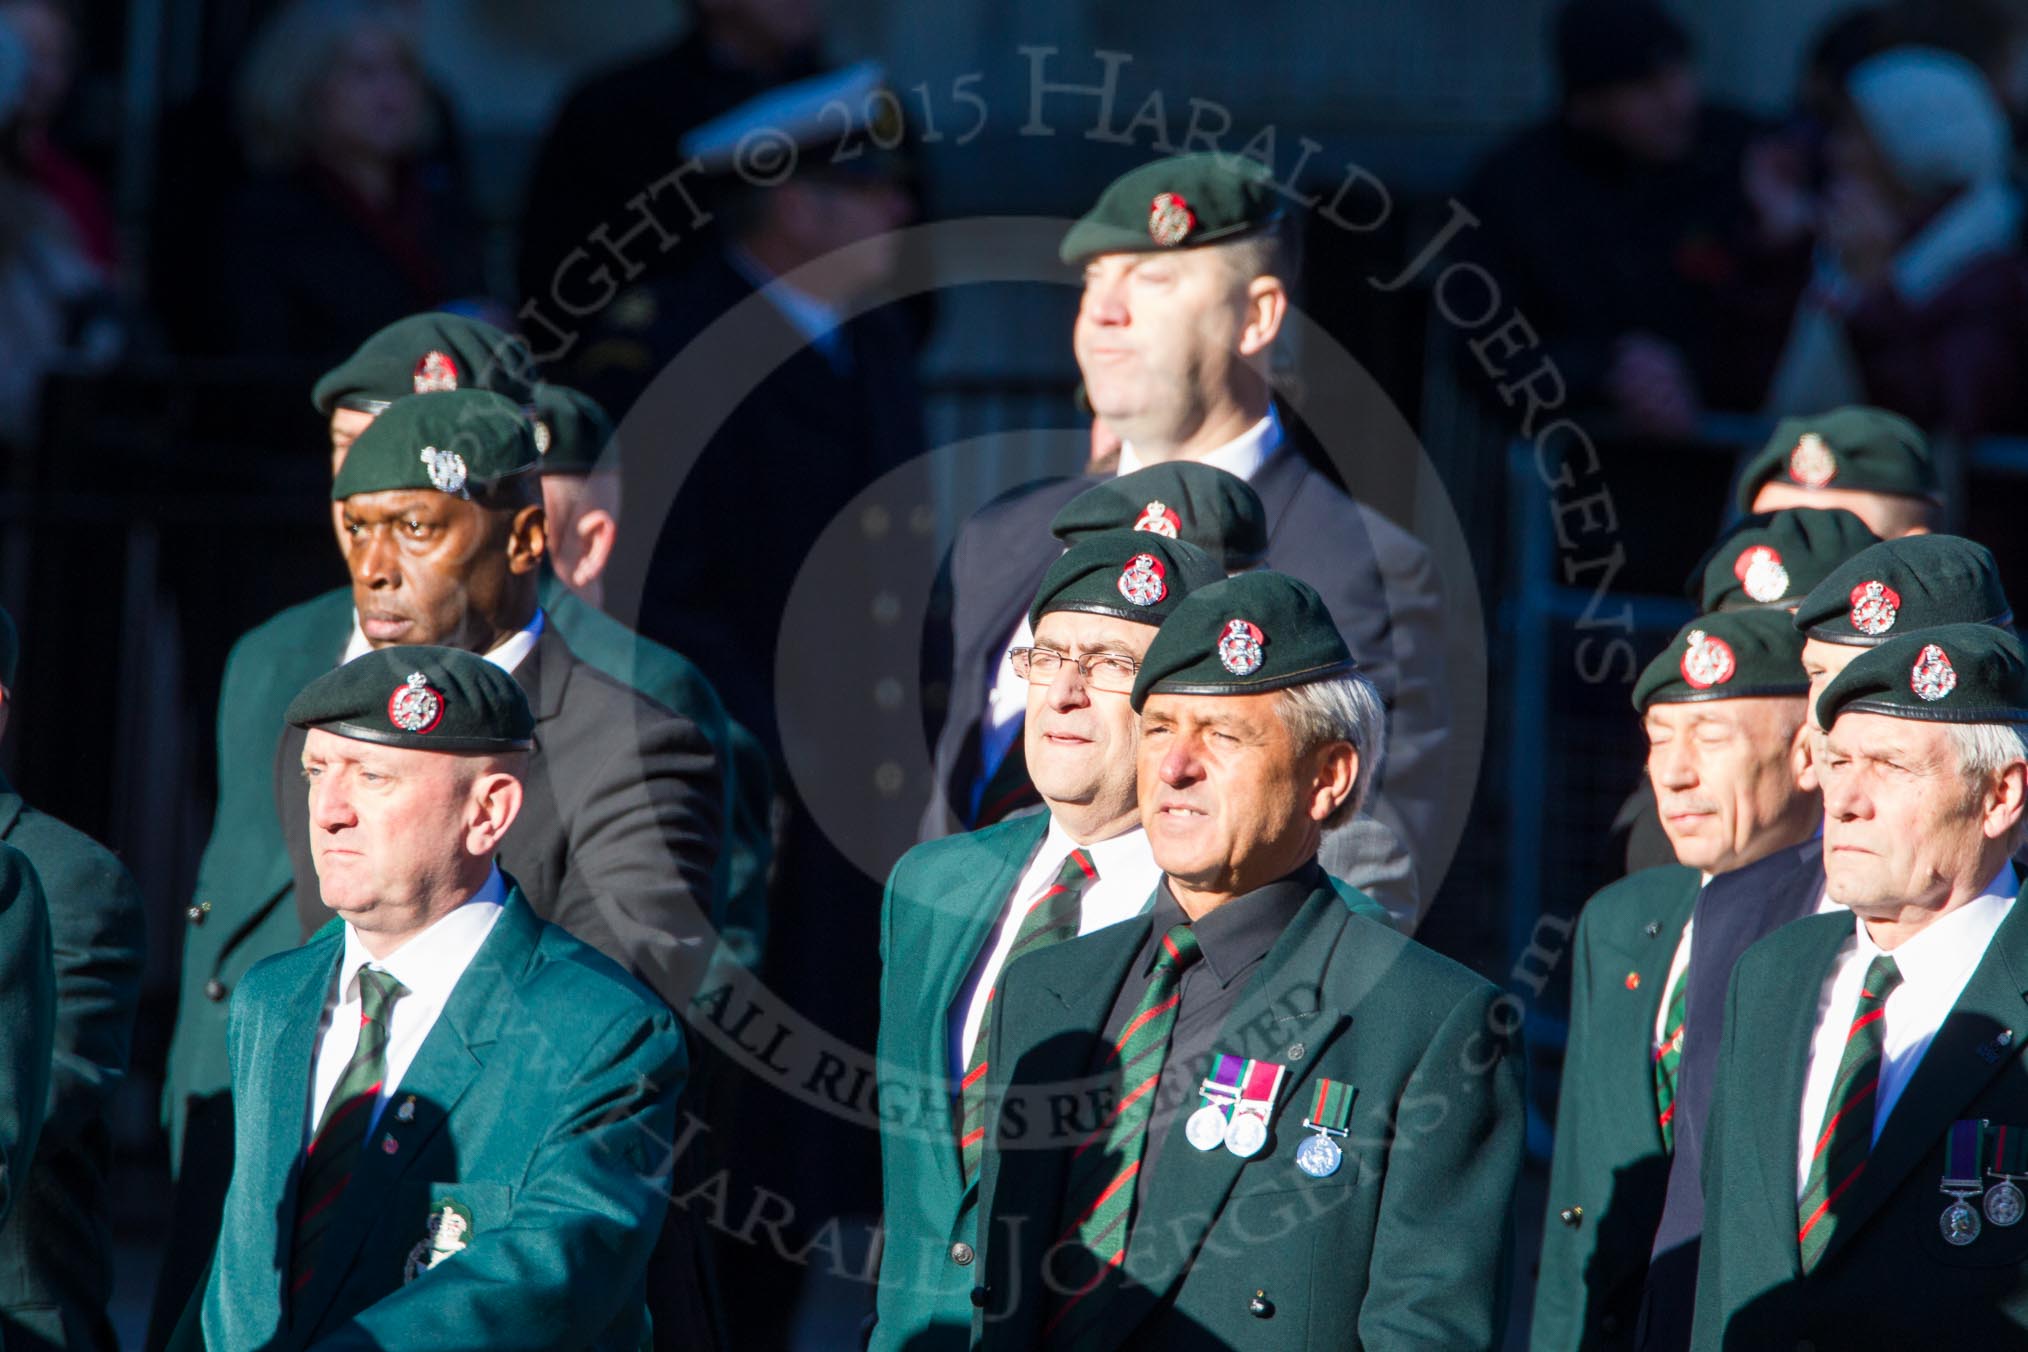 Remembrance Sunday Cenotaph March Past 2013: A16 - Royal Green Jackets Association..
Press stand opposite the Foreign Office building, Whitehall, London SW1,
London,
Greater London,
United Kingdom,
on 10 November 2013 at 11:56, image #1136